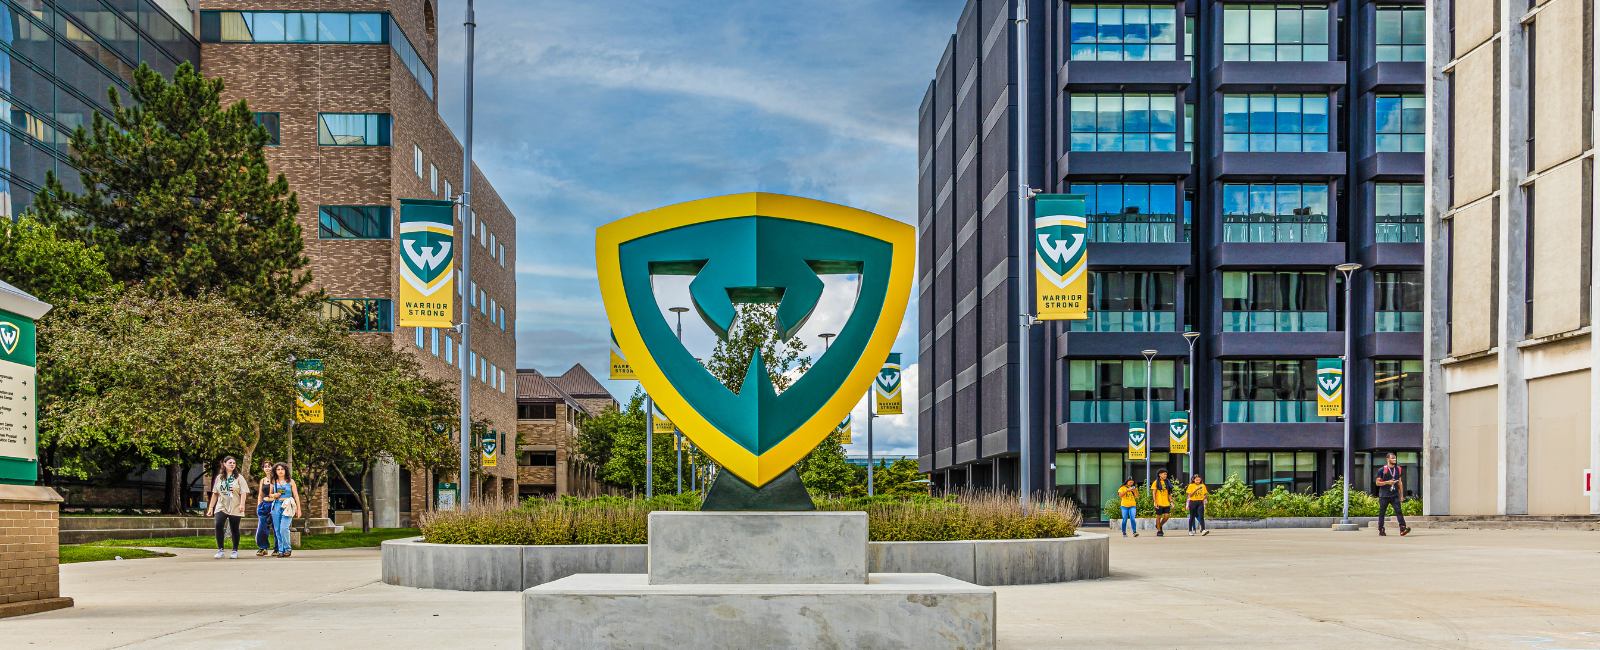 A sculpture of the WSU shield logo on campus